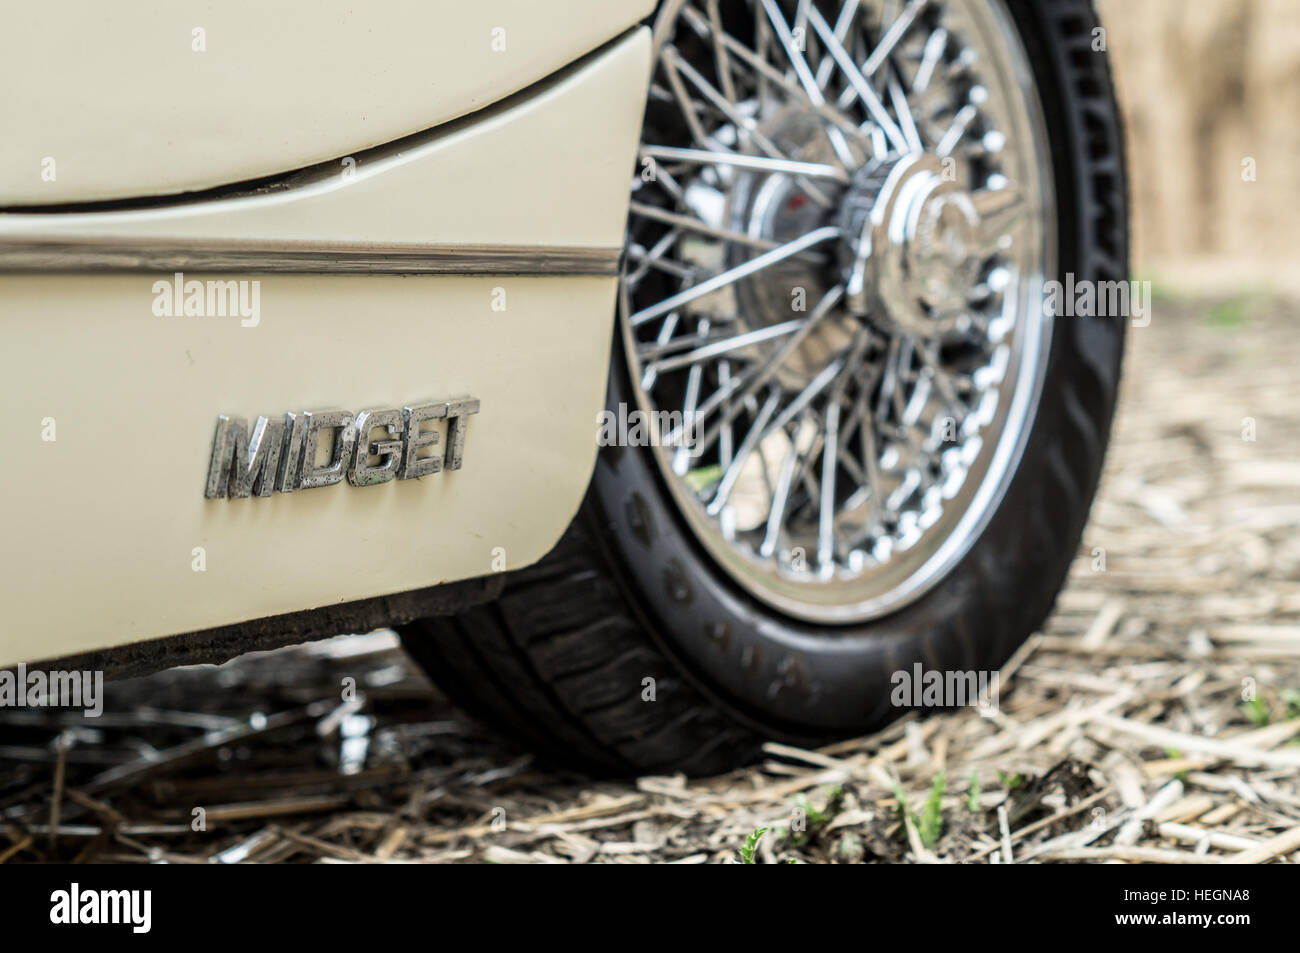 MG Midget front wheel and side badge. Stock Photo